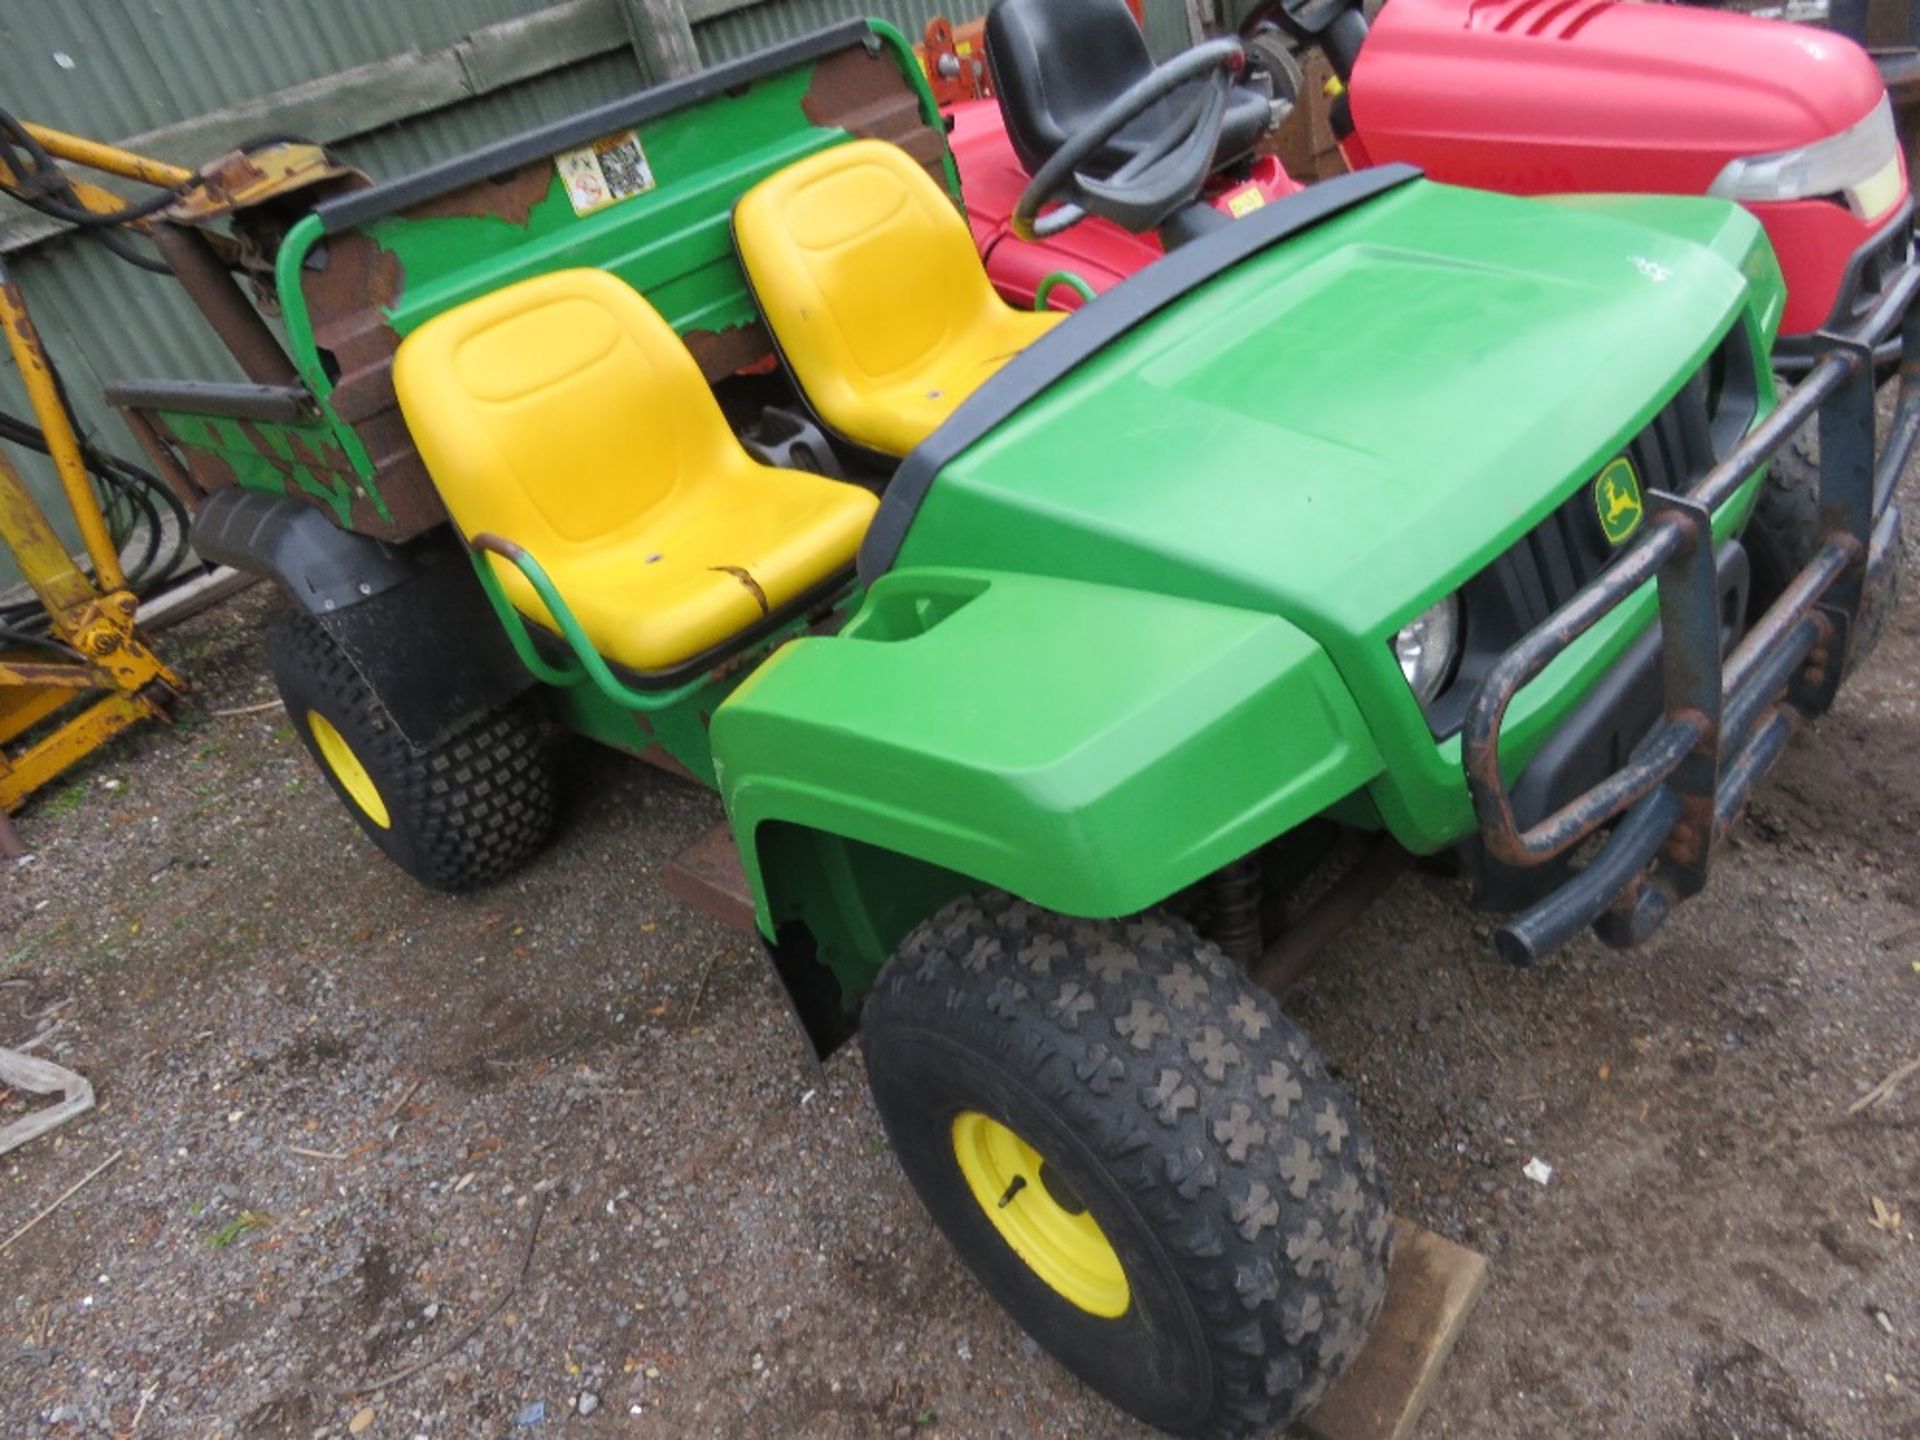 JOHN DEERE DIESEL ENGINED GATOR UTILITY VEHICLE, 2WD. WHEN TESTED WAS SEEN TO DRIVE. SEE VIDEO.